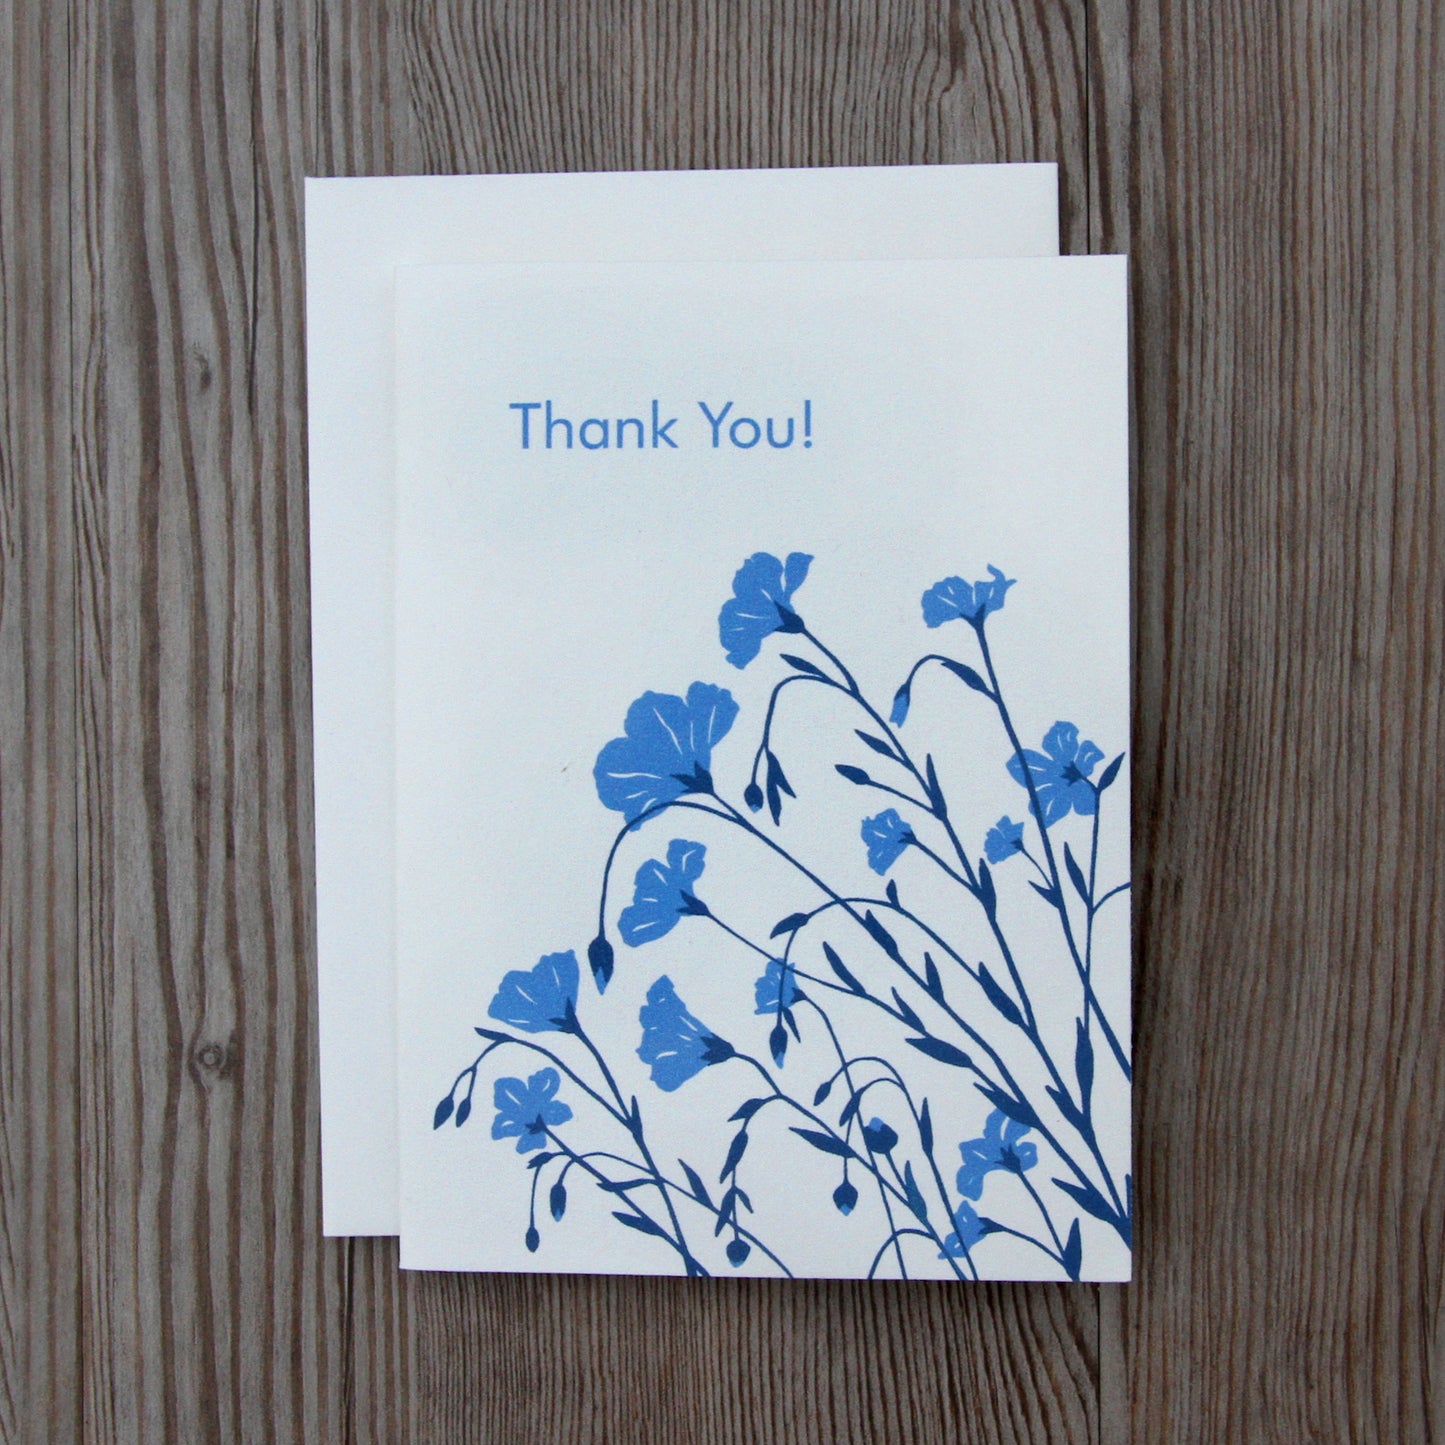 4 Flax 'Thank You' Notecard in Flax Blue